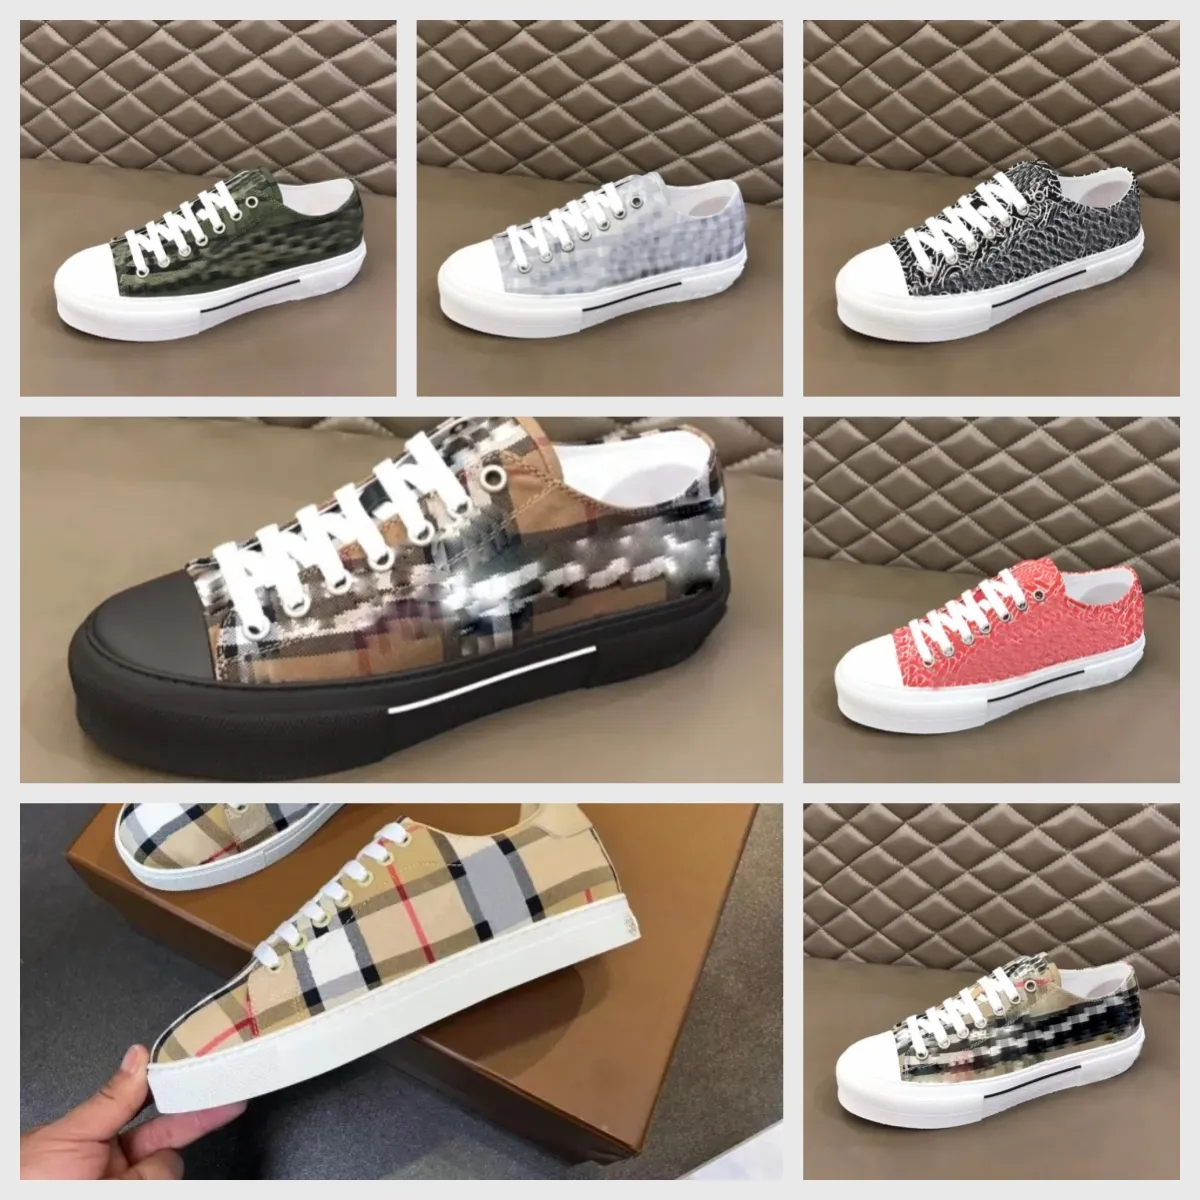 Vintage Print Check Sneakers Designer Casual Shoe Men Two-tone Cotton Gabardine Flats Shoe Printed Lettering Plaid Calfskin Canvas Trainers With Box